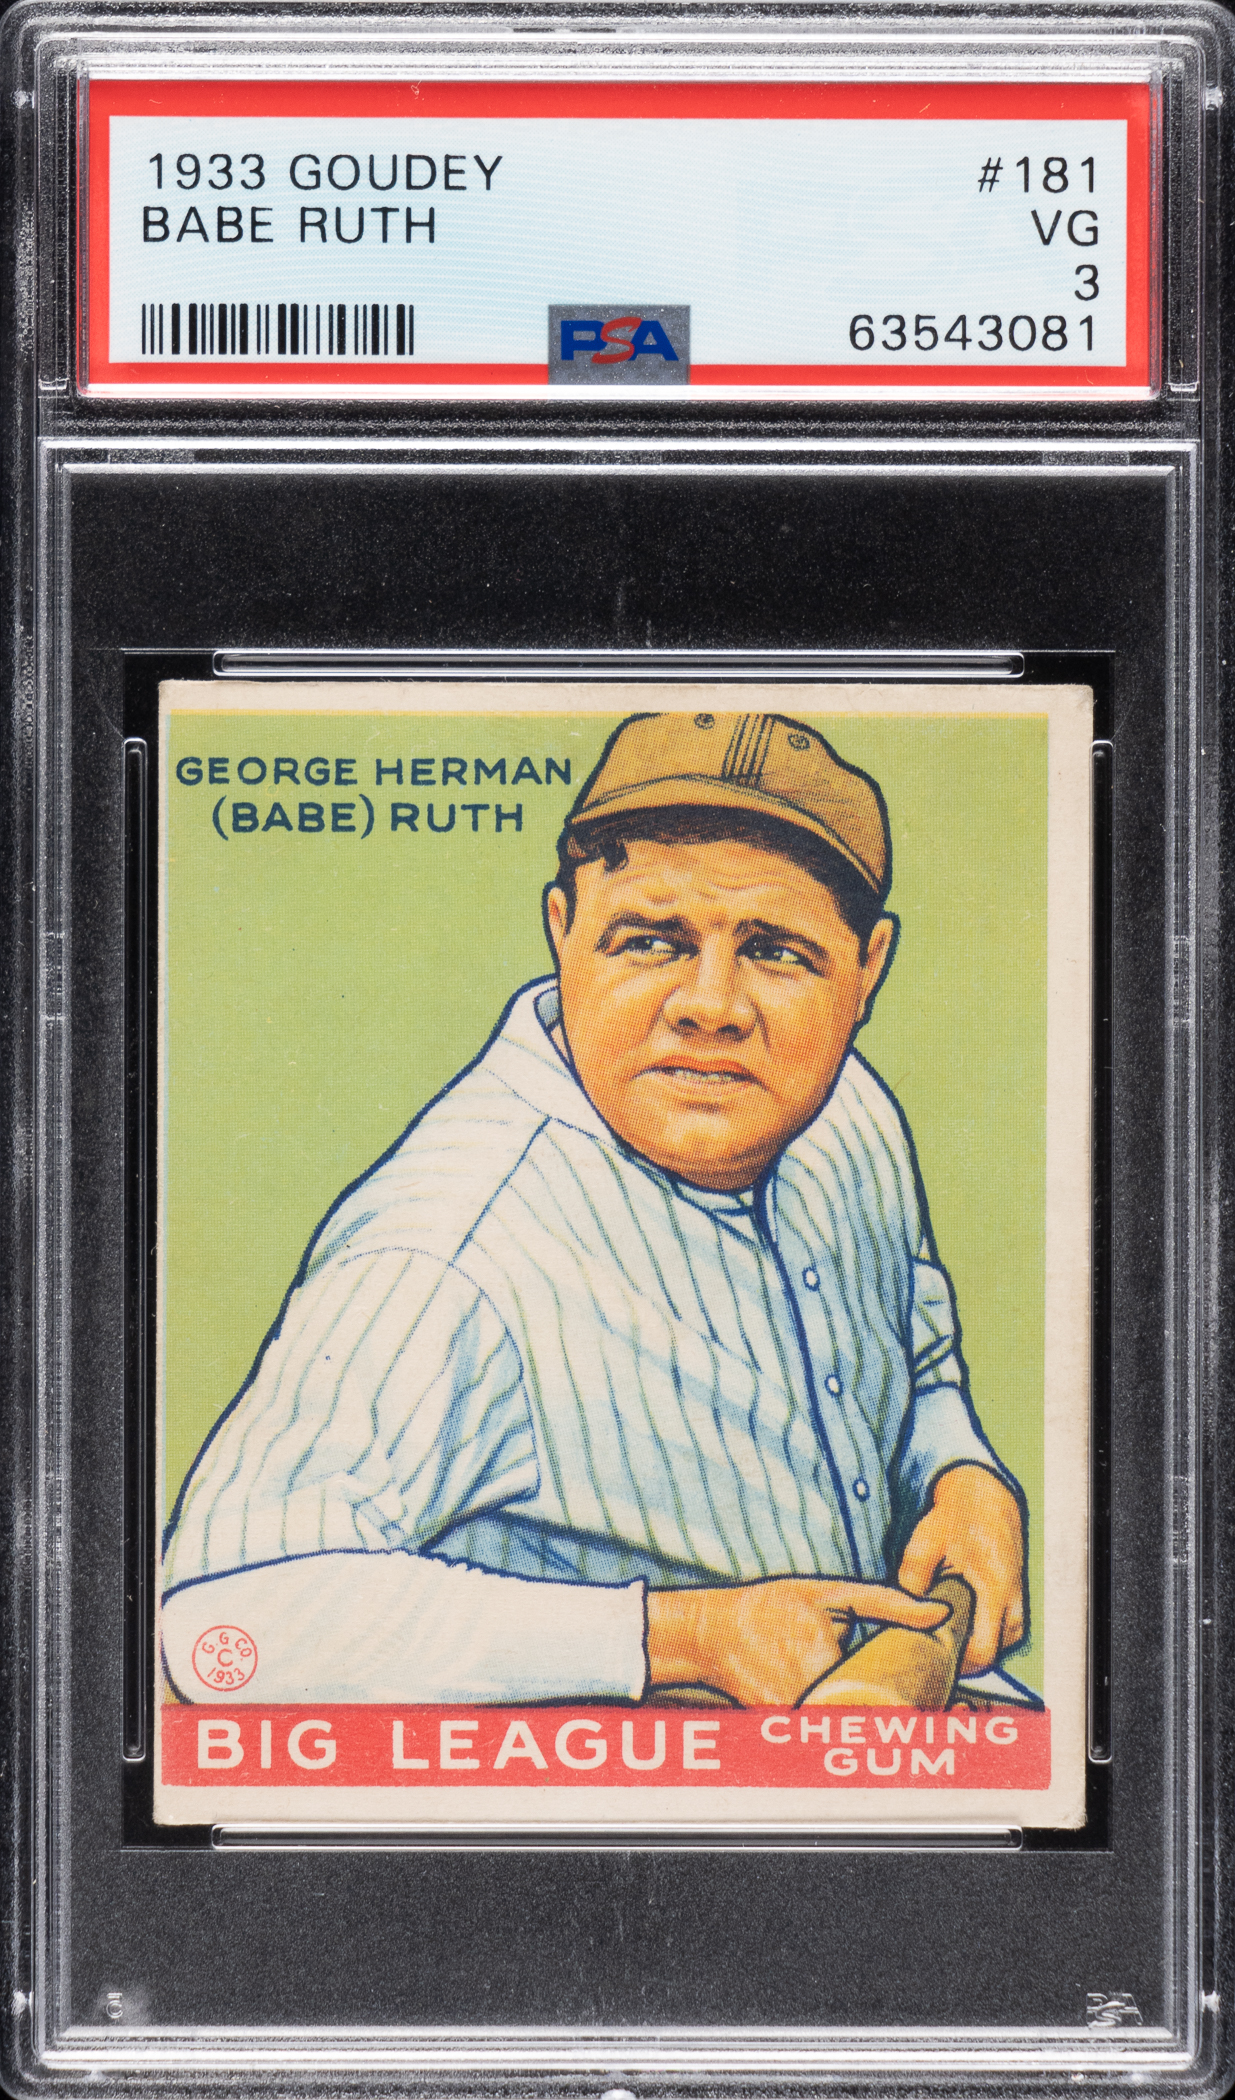 A 1933 R319 Goudey #181 Babe Ruth PSA VG 3 sold for $15,600